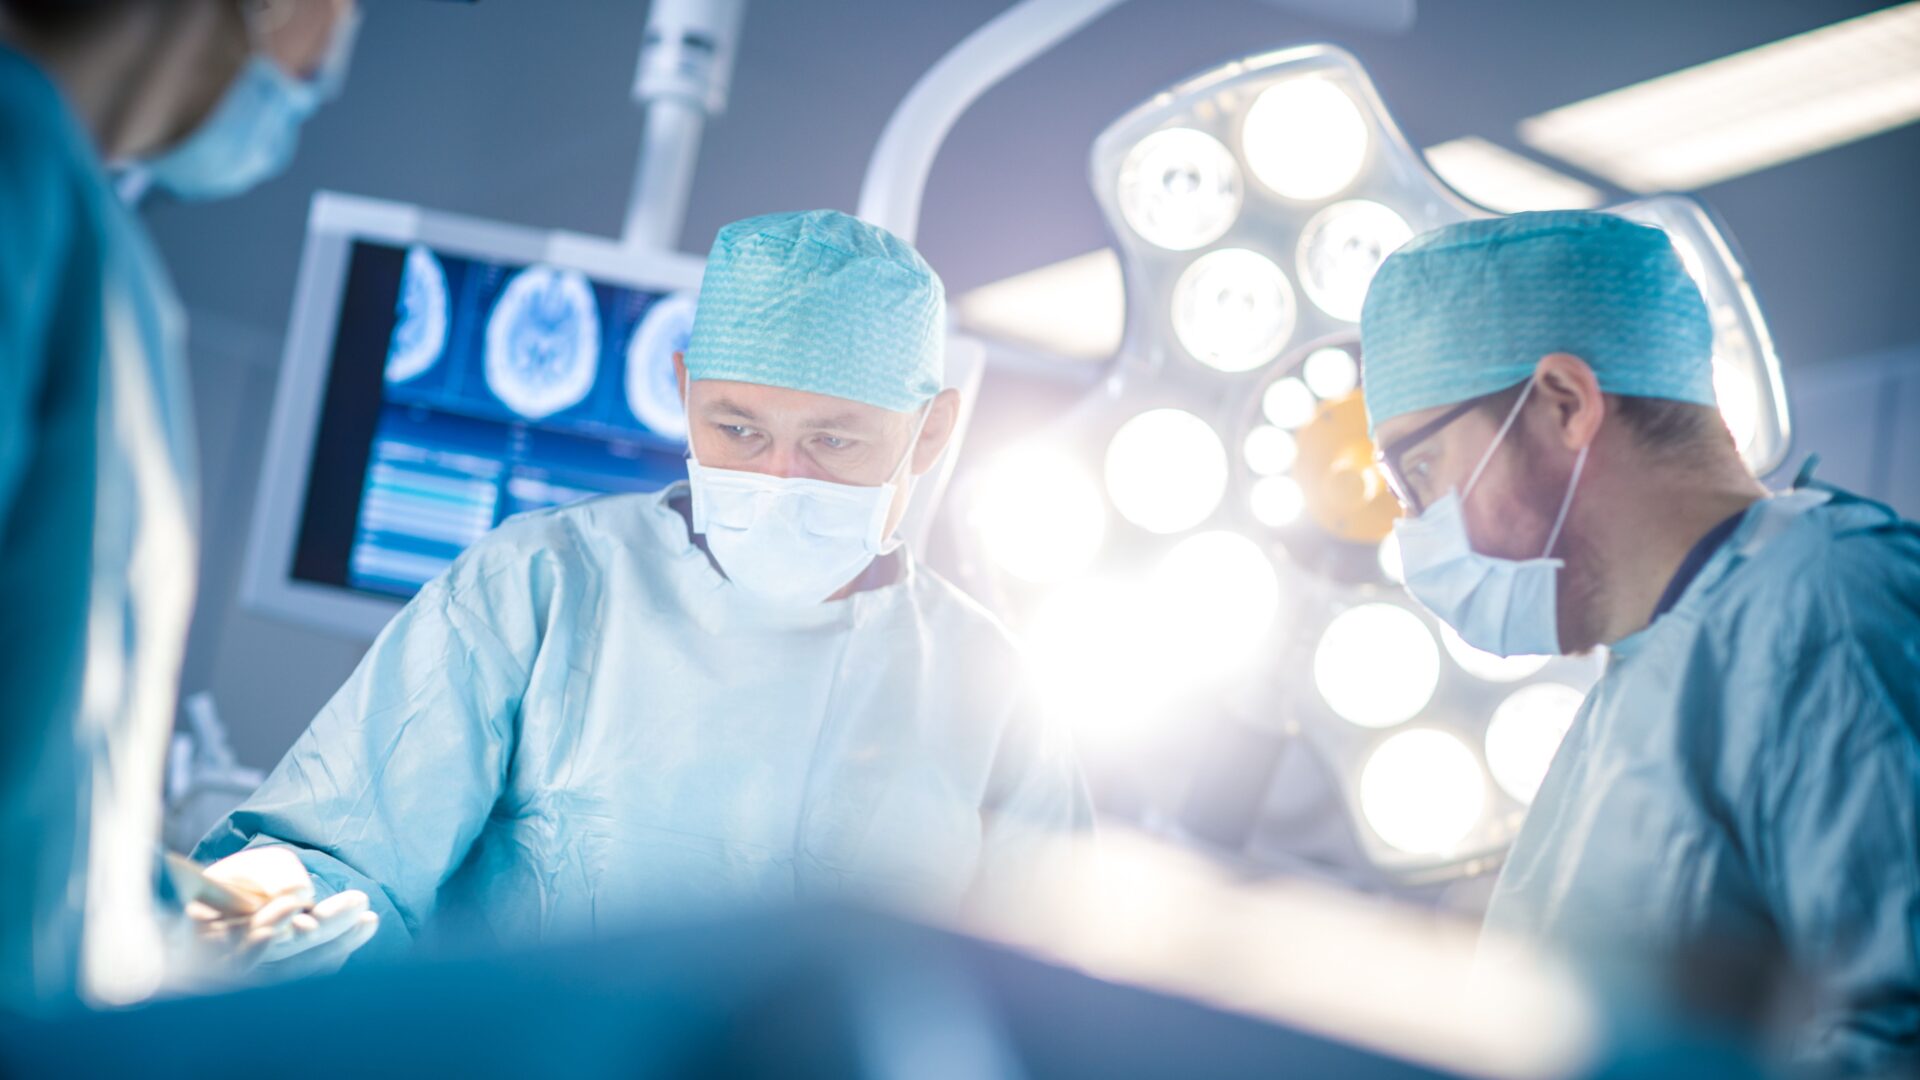 Two surgeons in a hospital operating room with lights